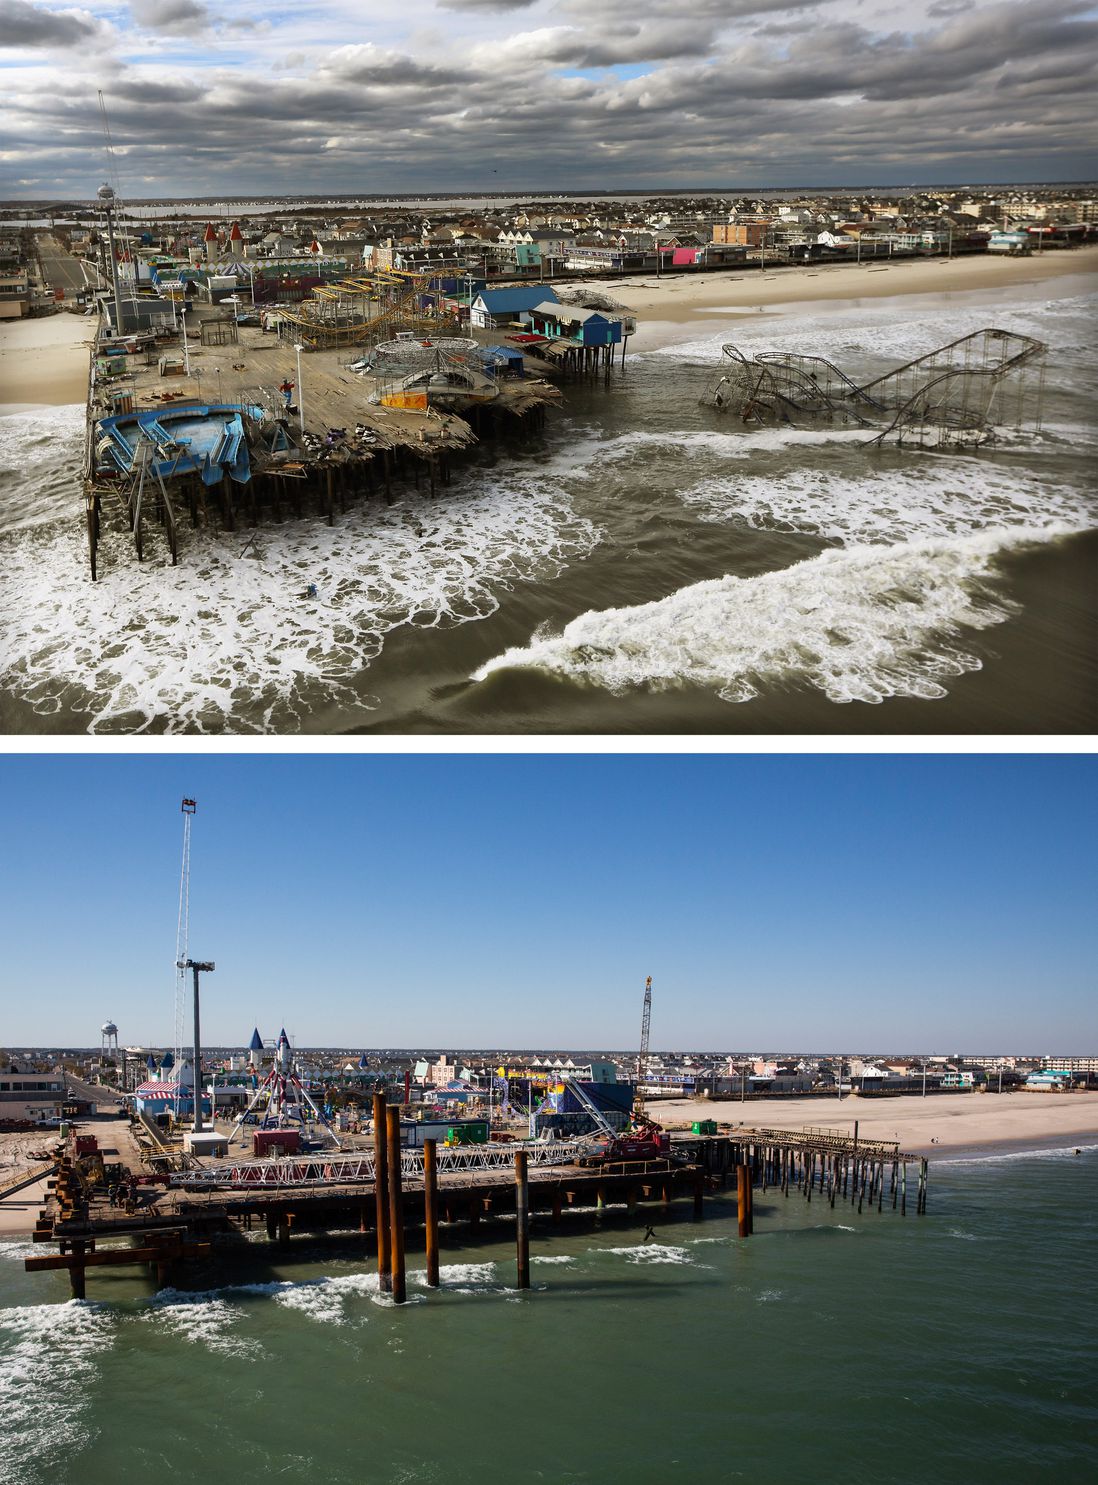 [Top] The boardwalk and amusement park in Seaside Heights, New Jersey is shown destroyed by Superstorm Sandy on October 31, 2012. [Bottom] The boardwalk and amusement park in Seaside Heights, New Jersey is shown October 21, 2013.